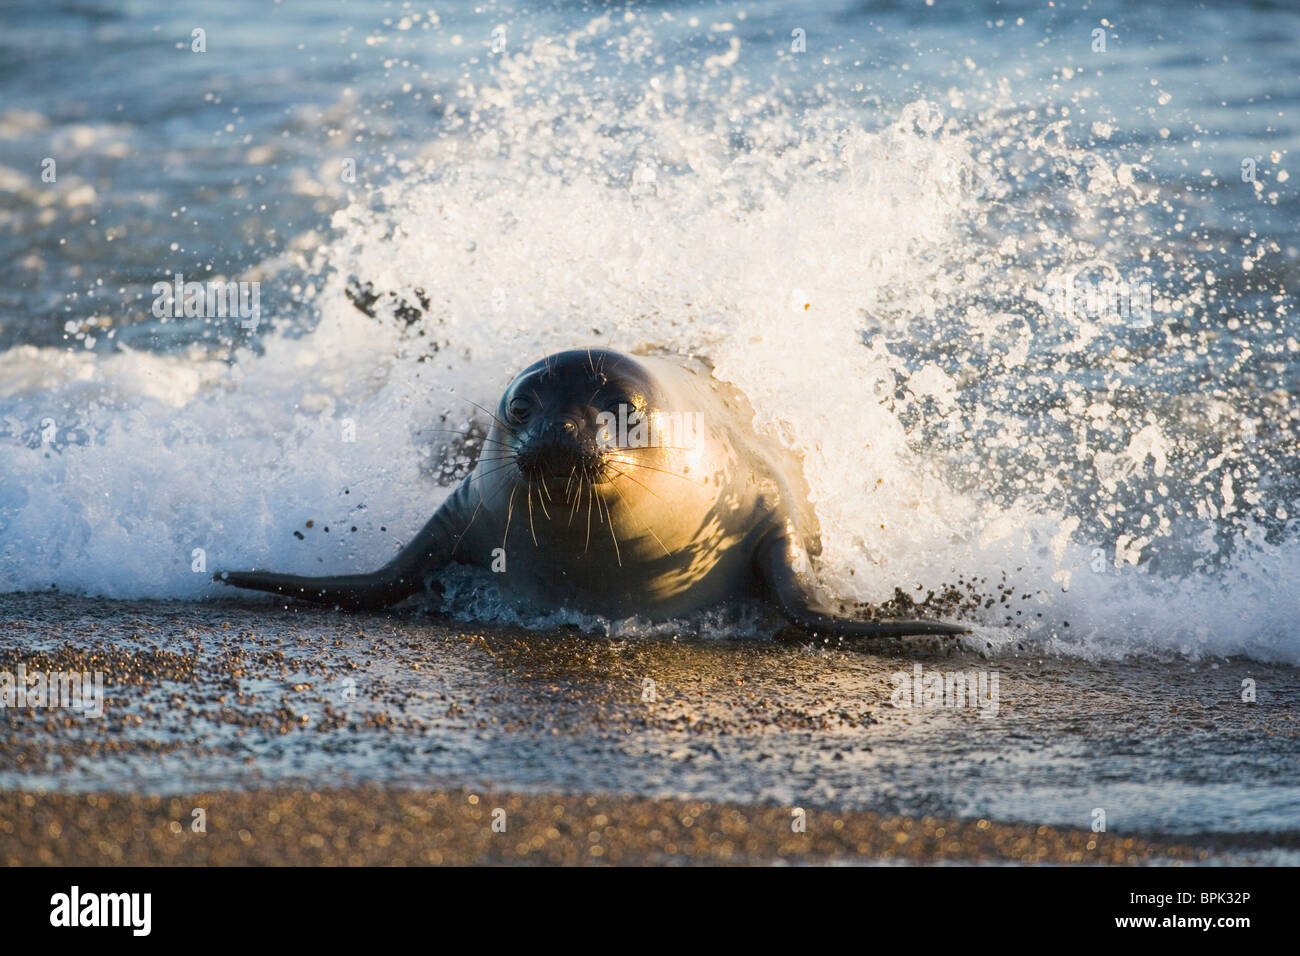 young southern elephant seal (Mirounga leonina) emerging from ocean, early morning Stock Photo